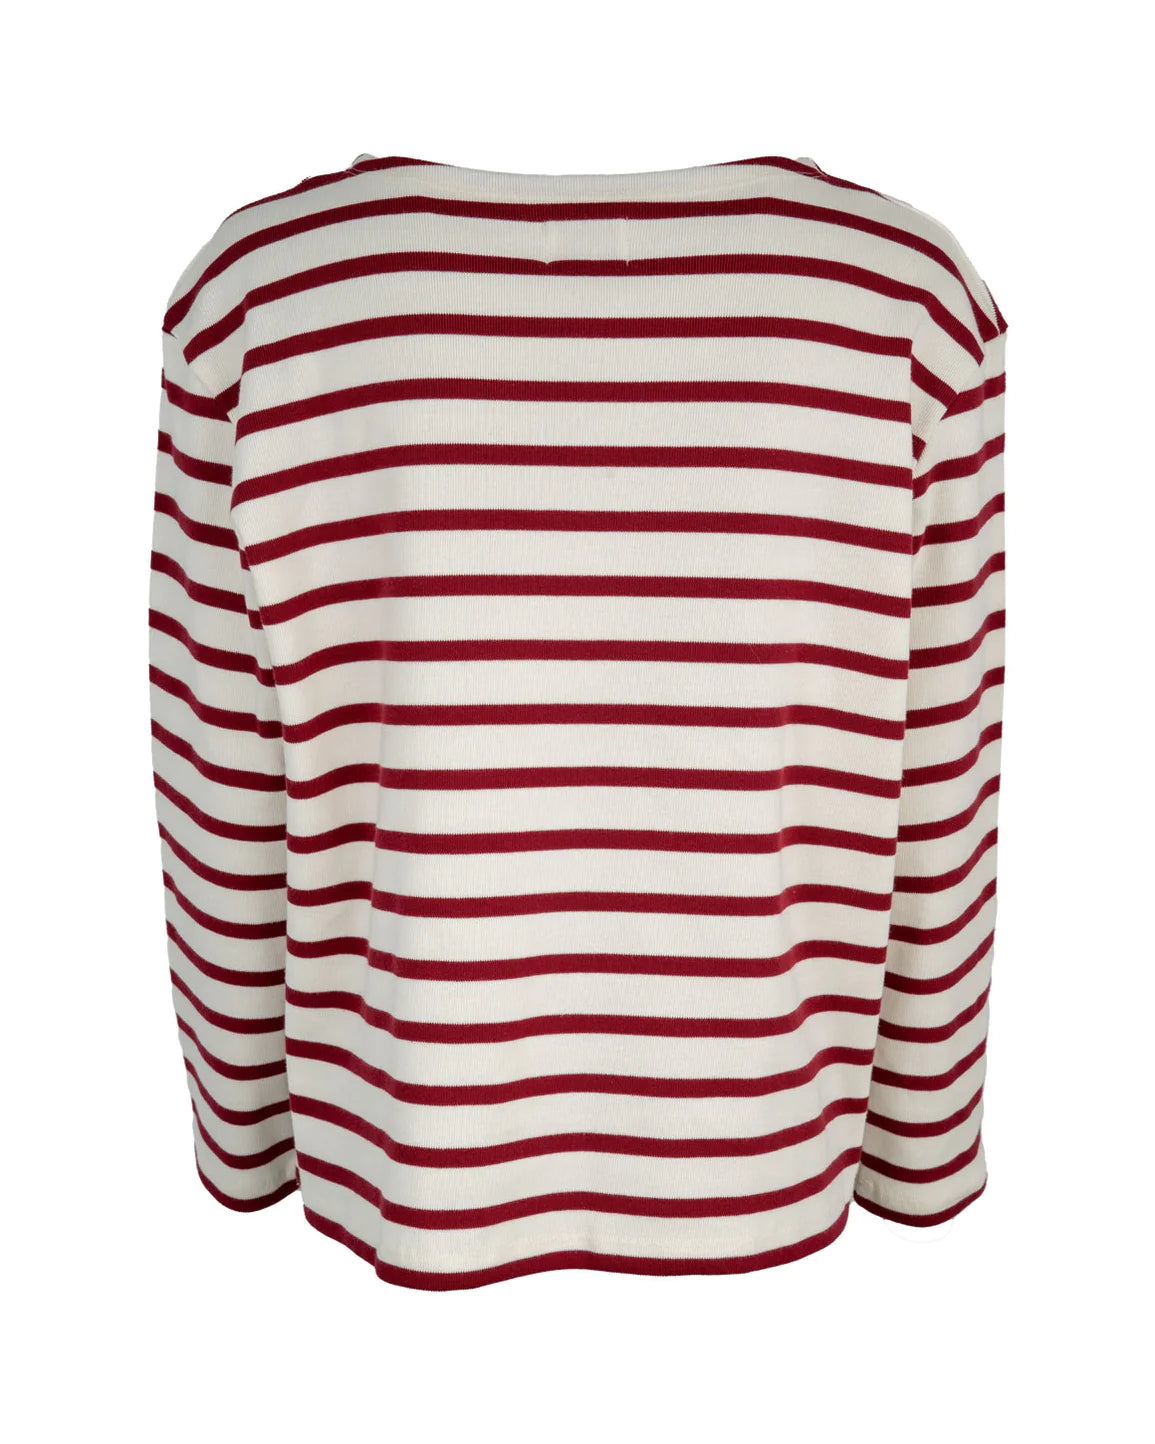 Claudia Sailor Blouse - Off White / Red Stripe